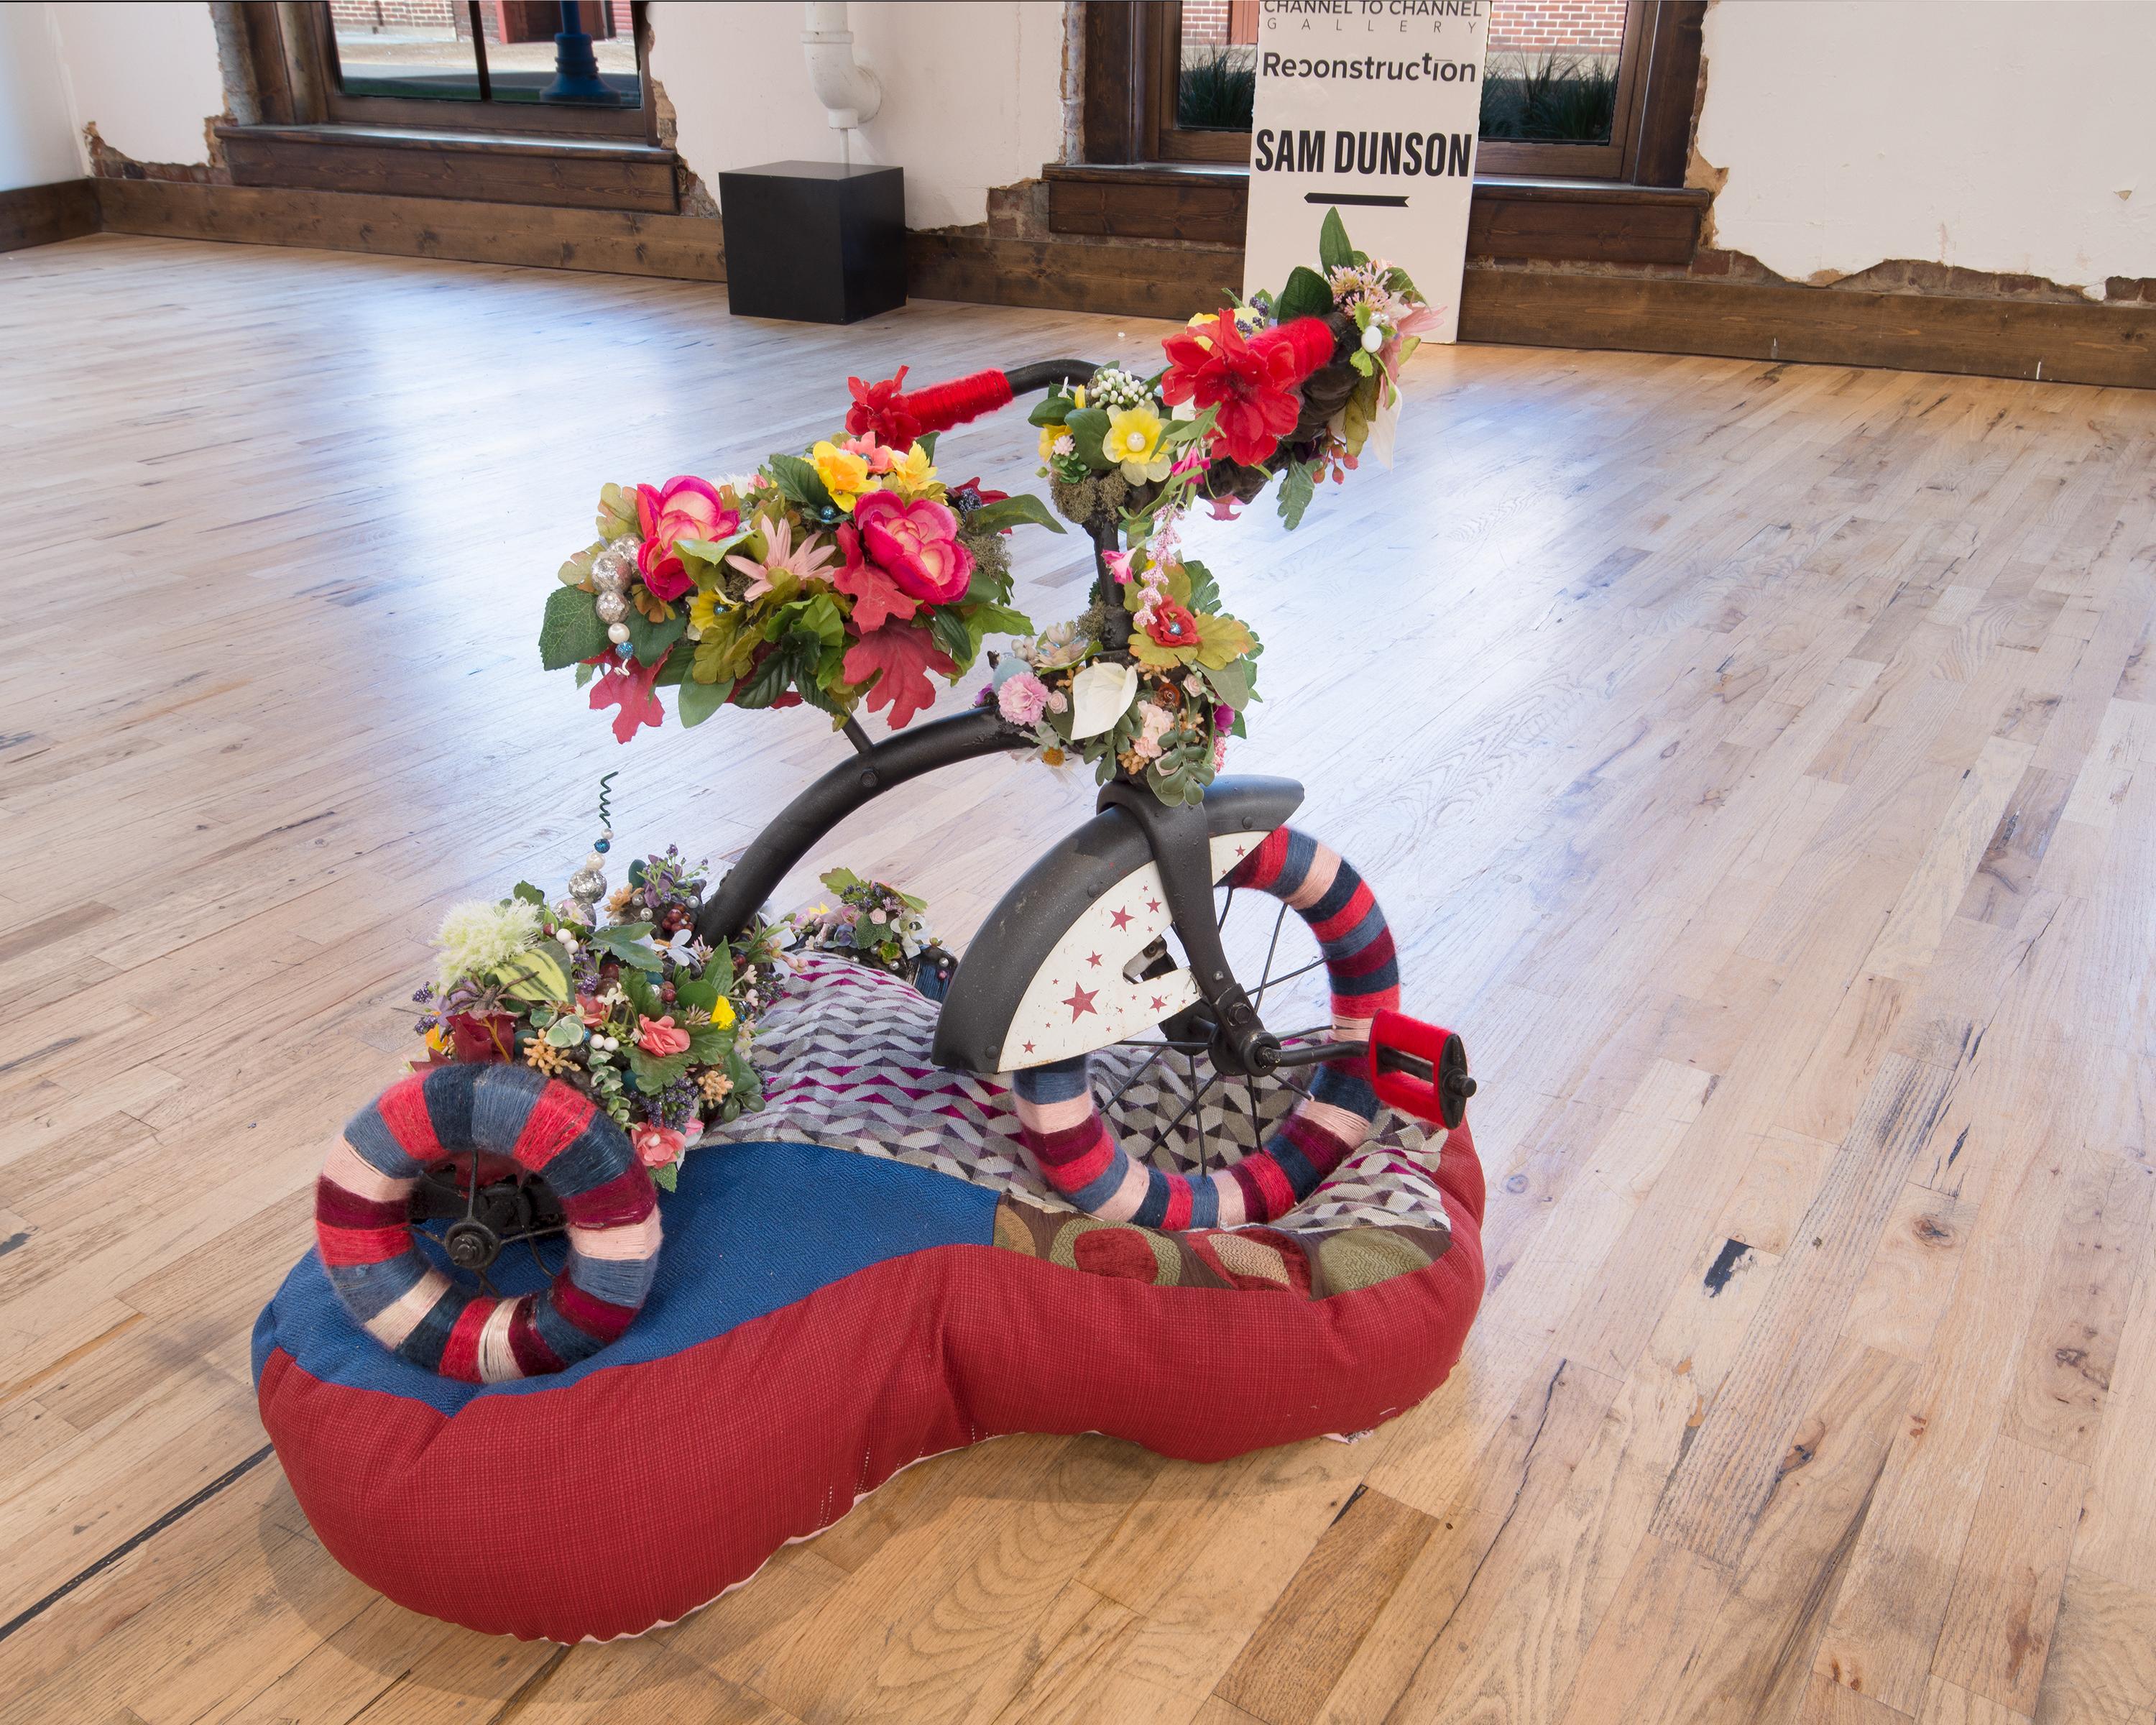 MAKE AMERICA GREAT AGAIN - Tricycle from the 40s adorned w/ Flowers on Cushion - Contemporary Mixed Media Art by Samuel Dunson